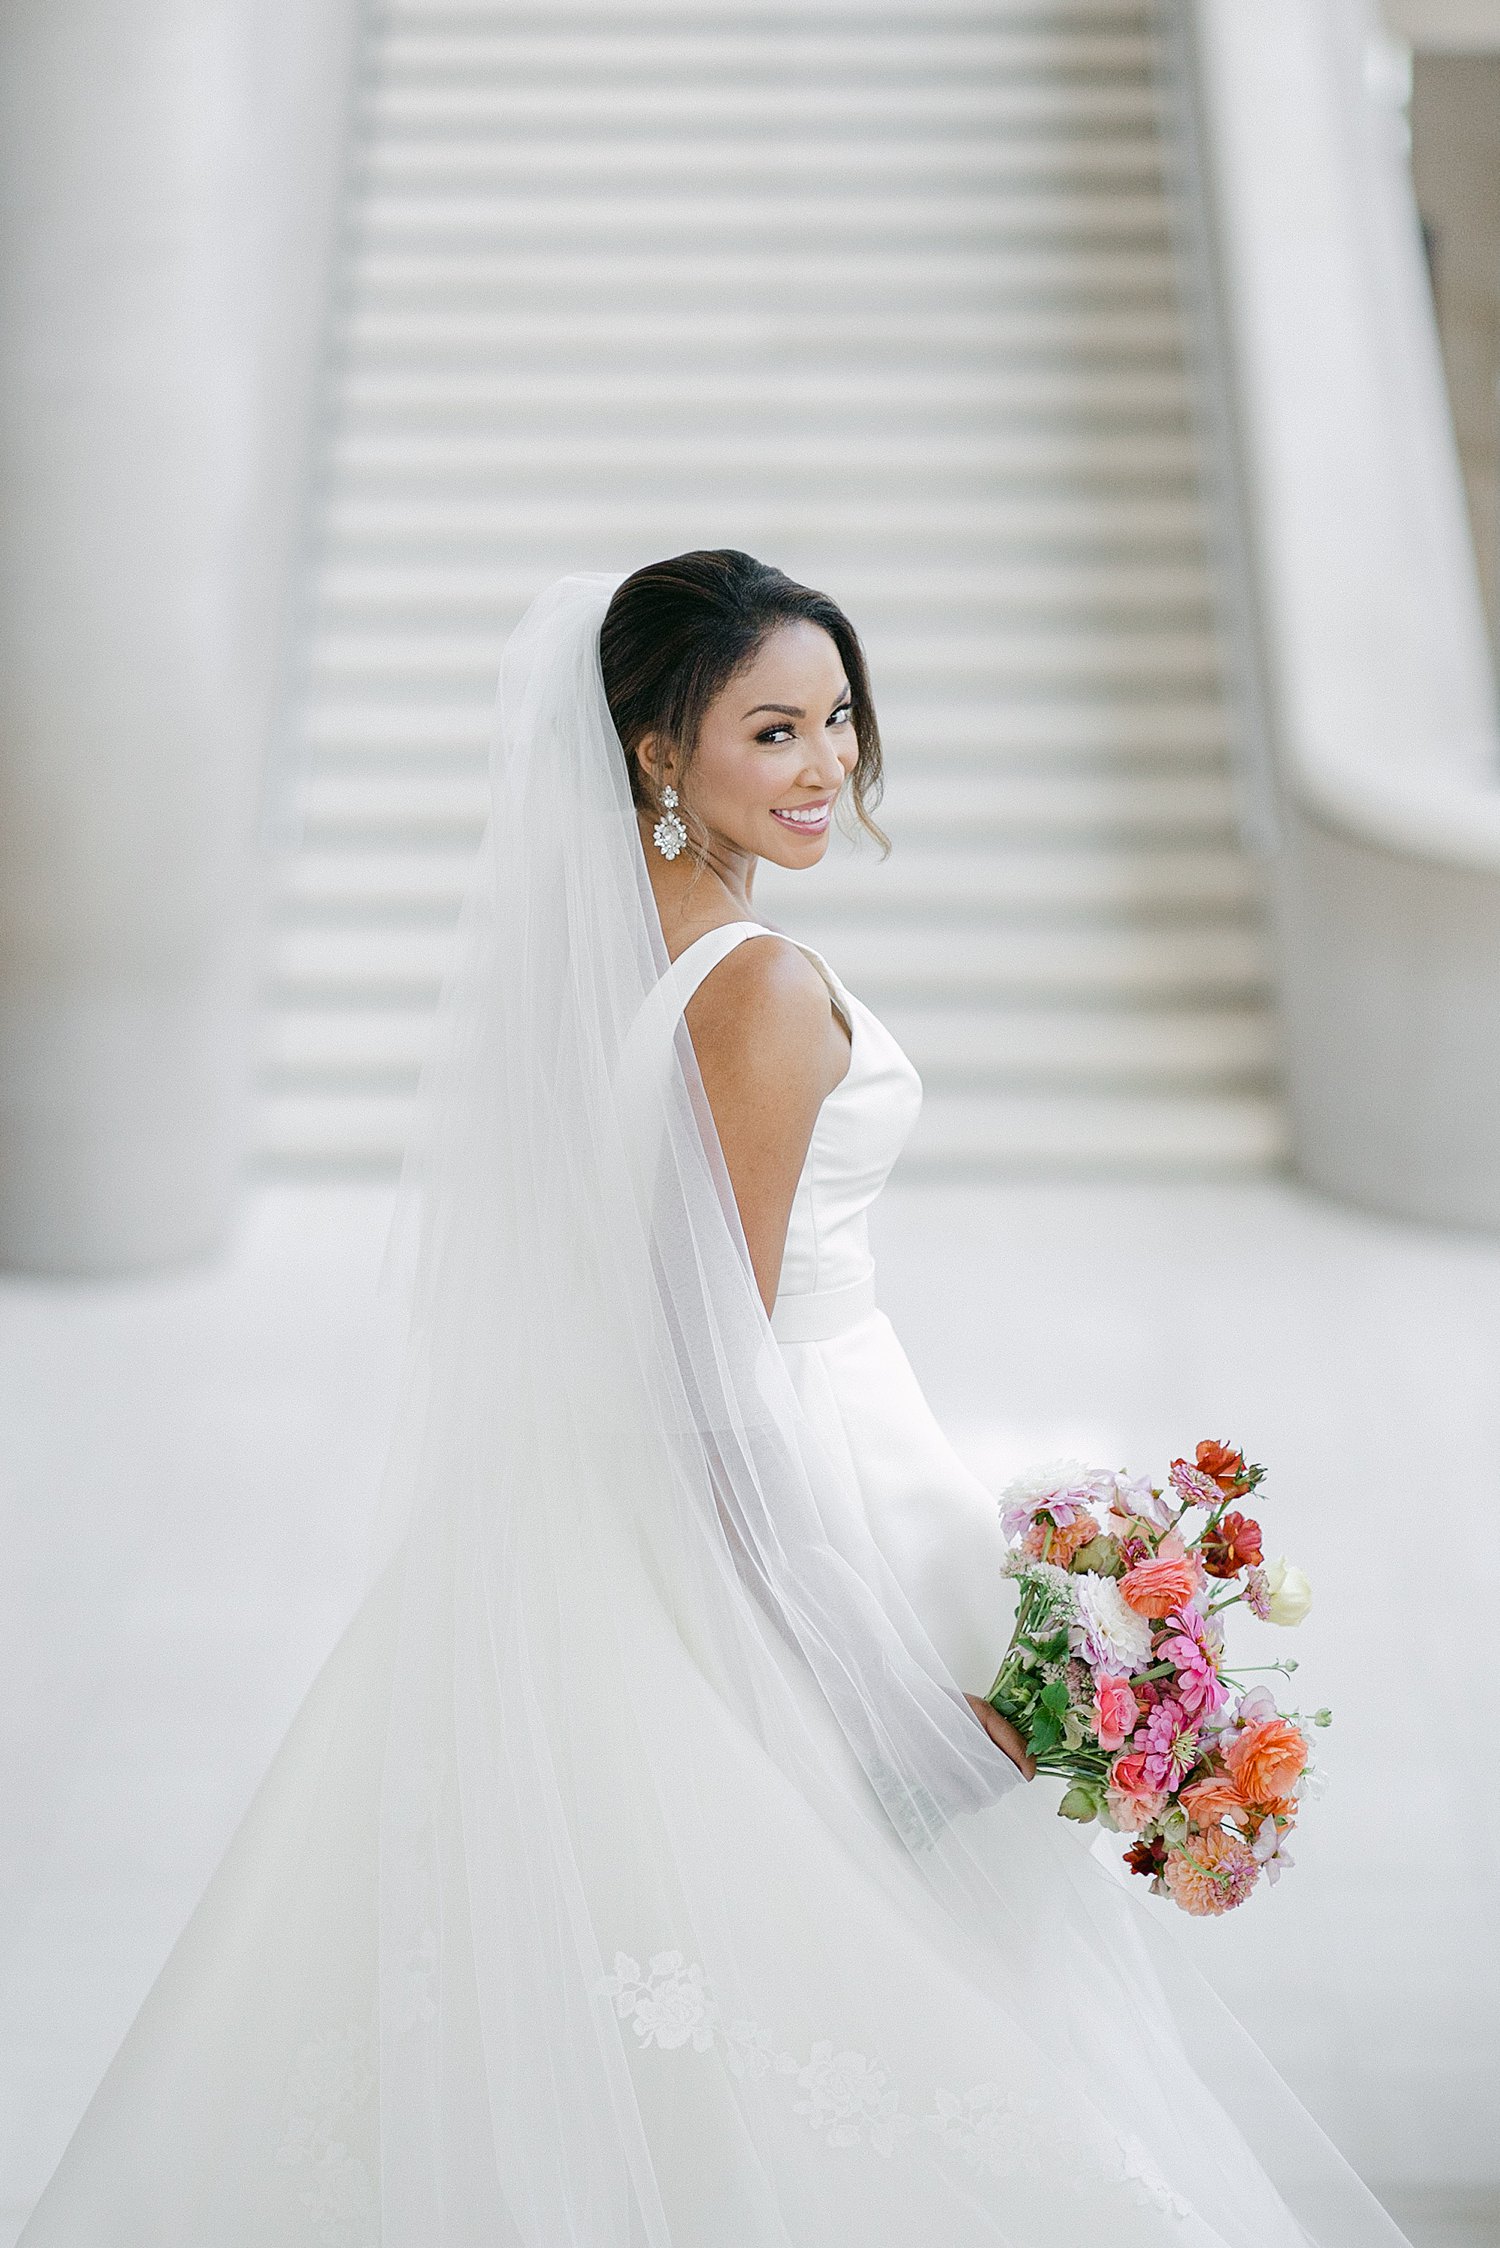 Bride in white wedding dress and veil holding colorful floral bouquet on top of staircase smiling Dallas Arts District